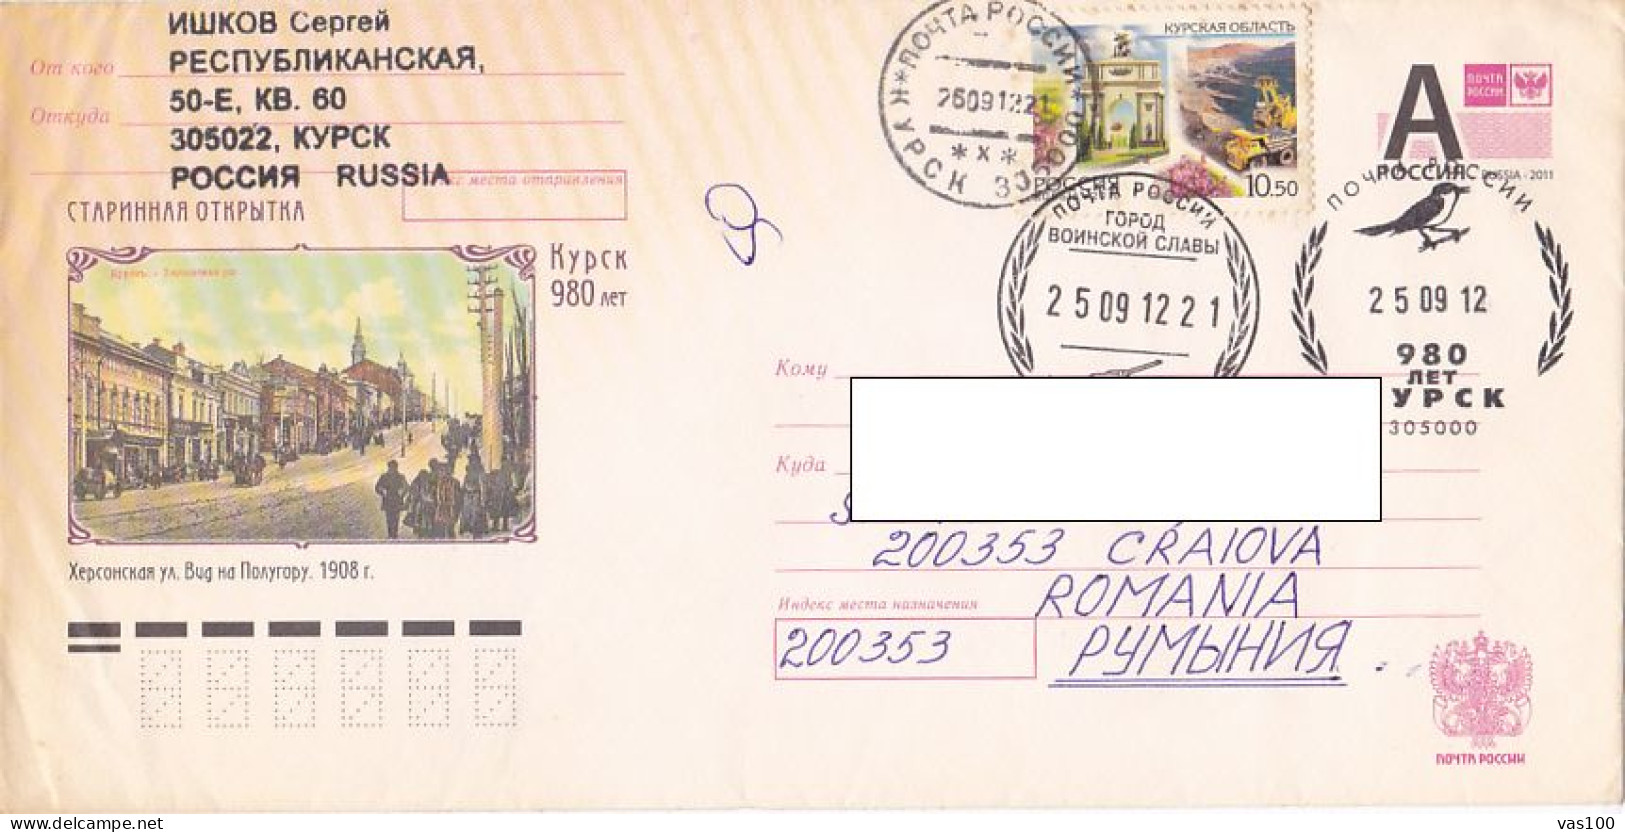 KURSK TOWN, OLD VIEW, COVER STATIONERY, ENTIER POSTAL, 2012, RUSSIA - Stamped Stationery